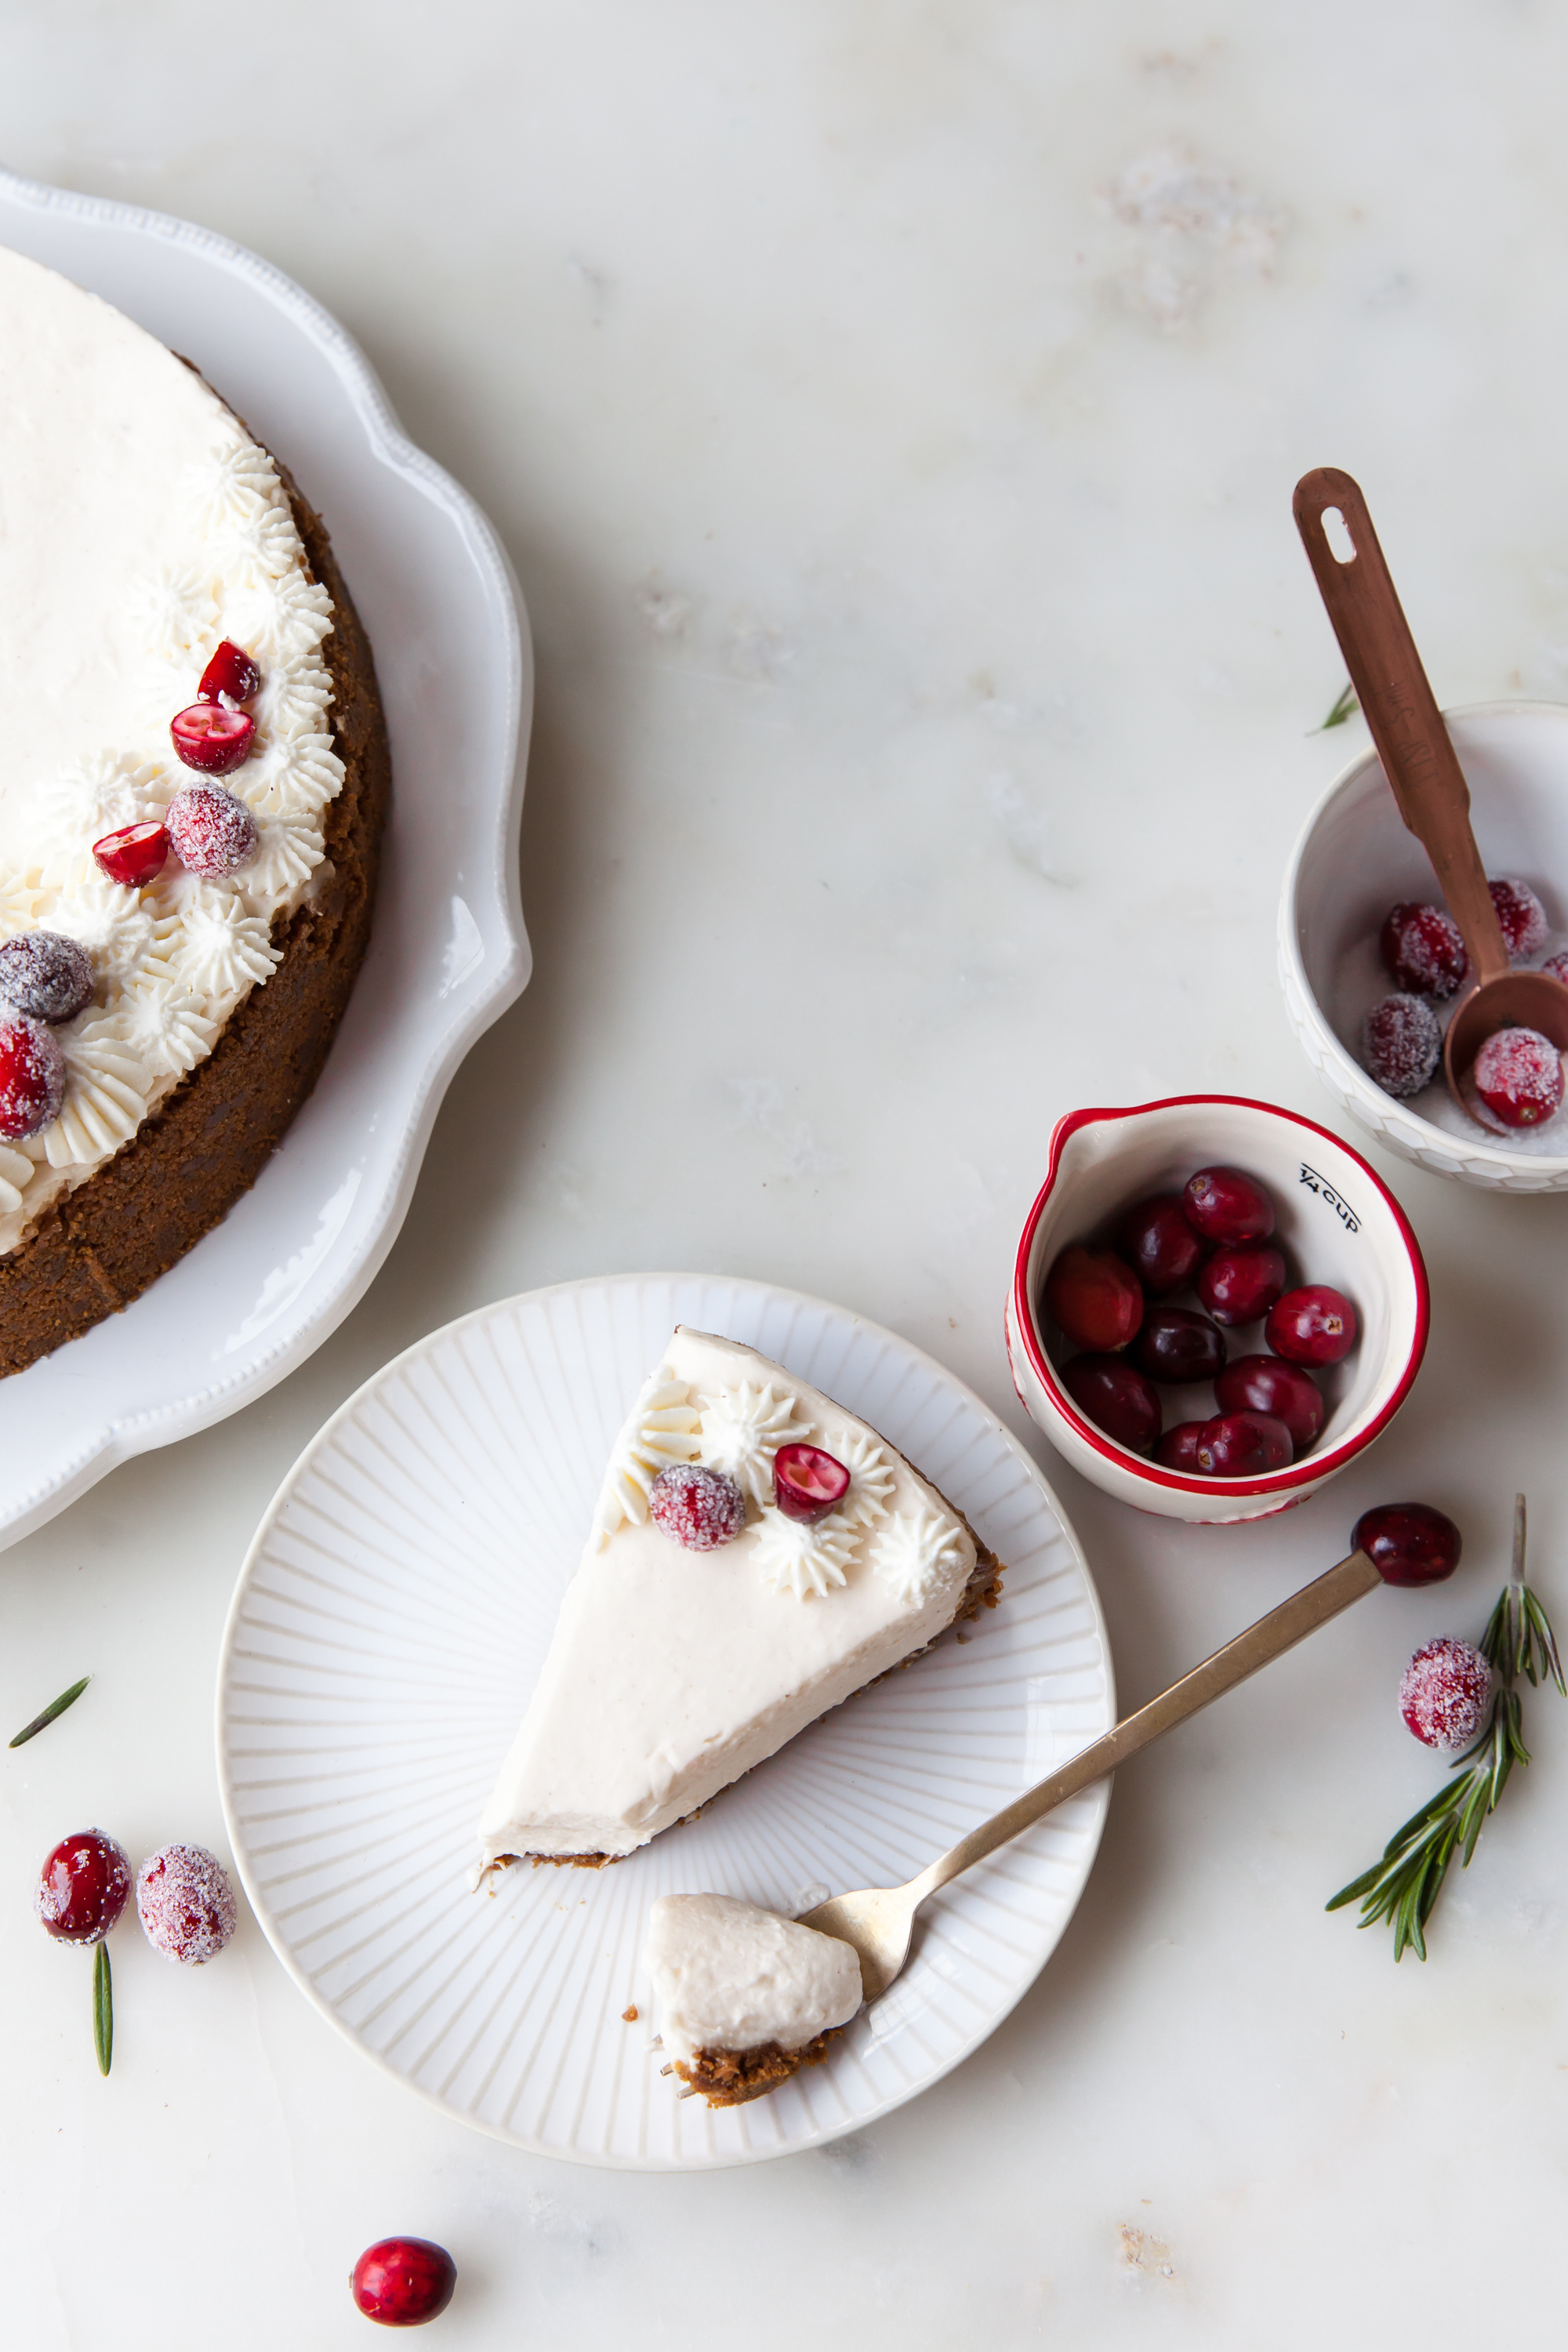 No-Bake Eggnog Cheesecake with sugared cranberries and gingersnap crust.